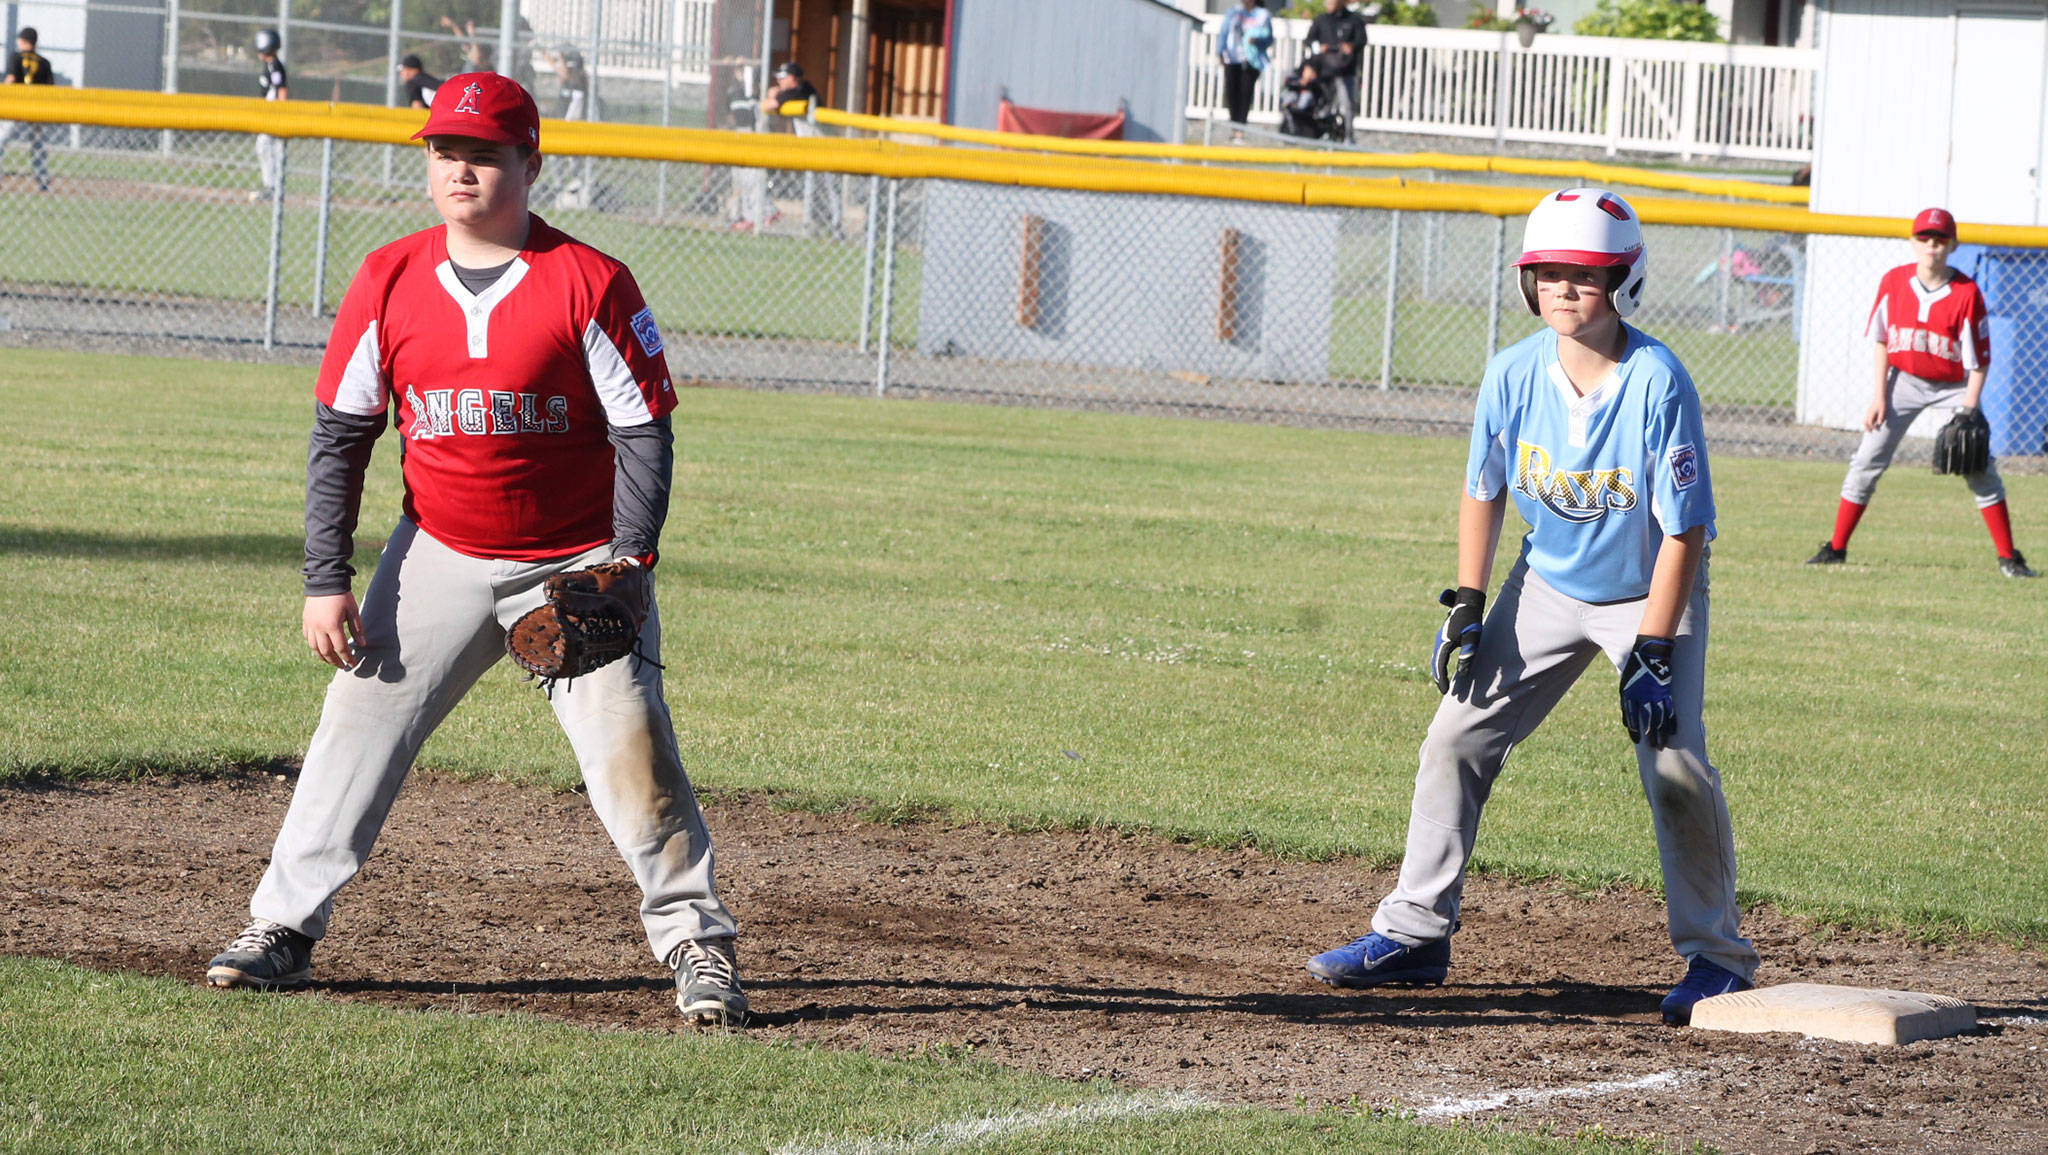 Brady Towsley, left, and Travis Westman compete in the Andrade Tournament last week. Now the North and Central Whidbey Little Leaguers are preparing for district tournament play. (Photo by Jim Waller/Whidbey News-Times)